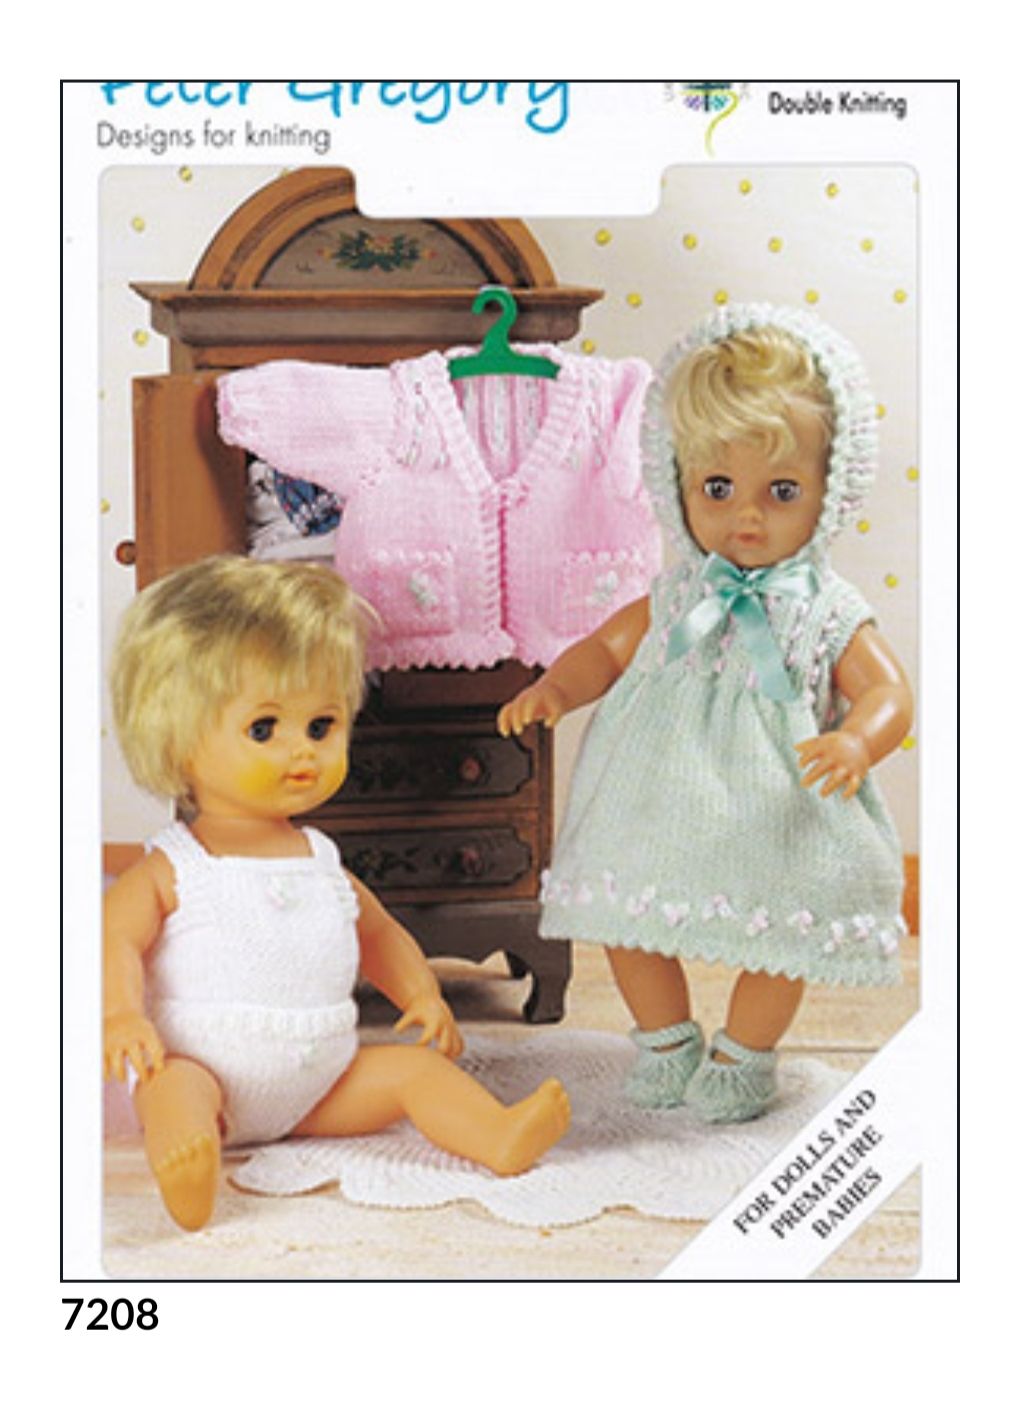 Doll and Premature Baby Knitting Pattern Dress,Cardigan PG7208